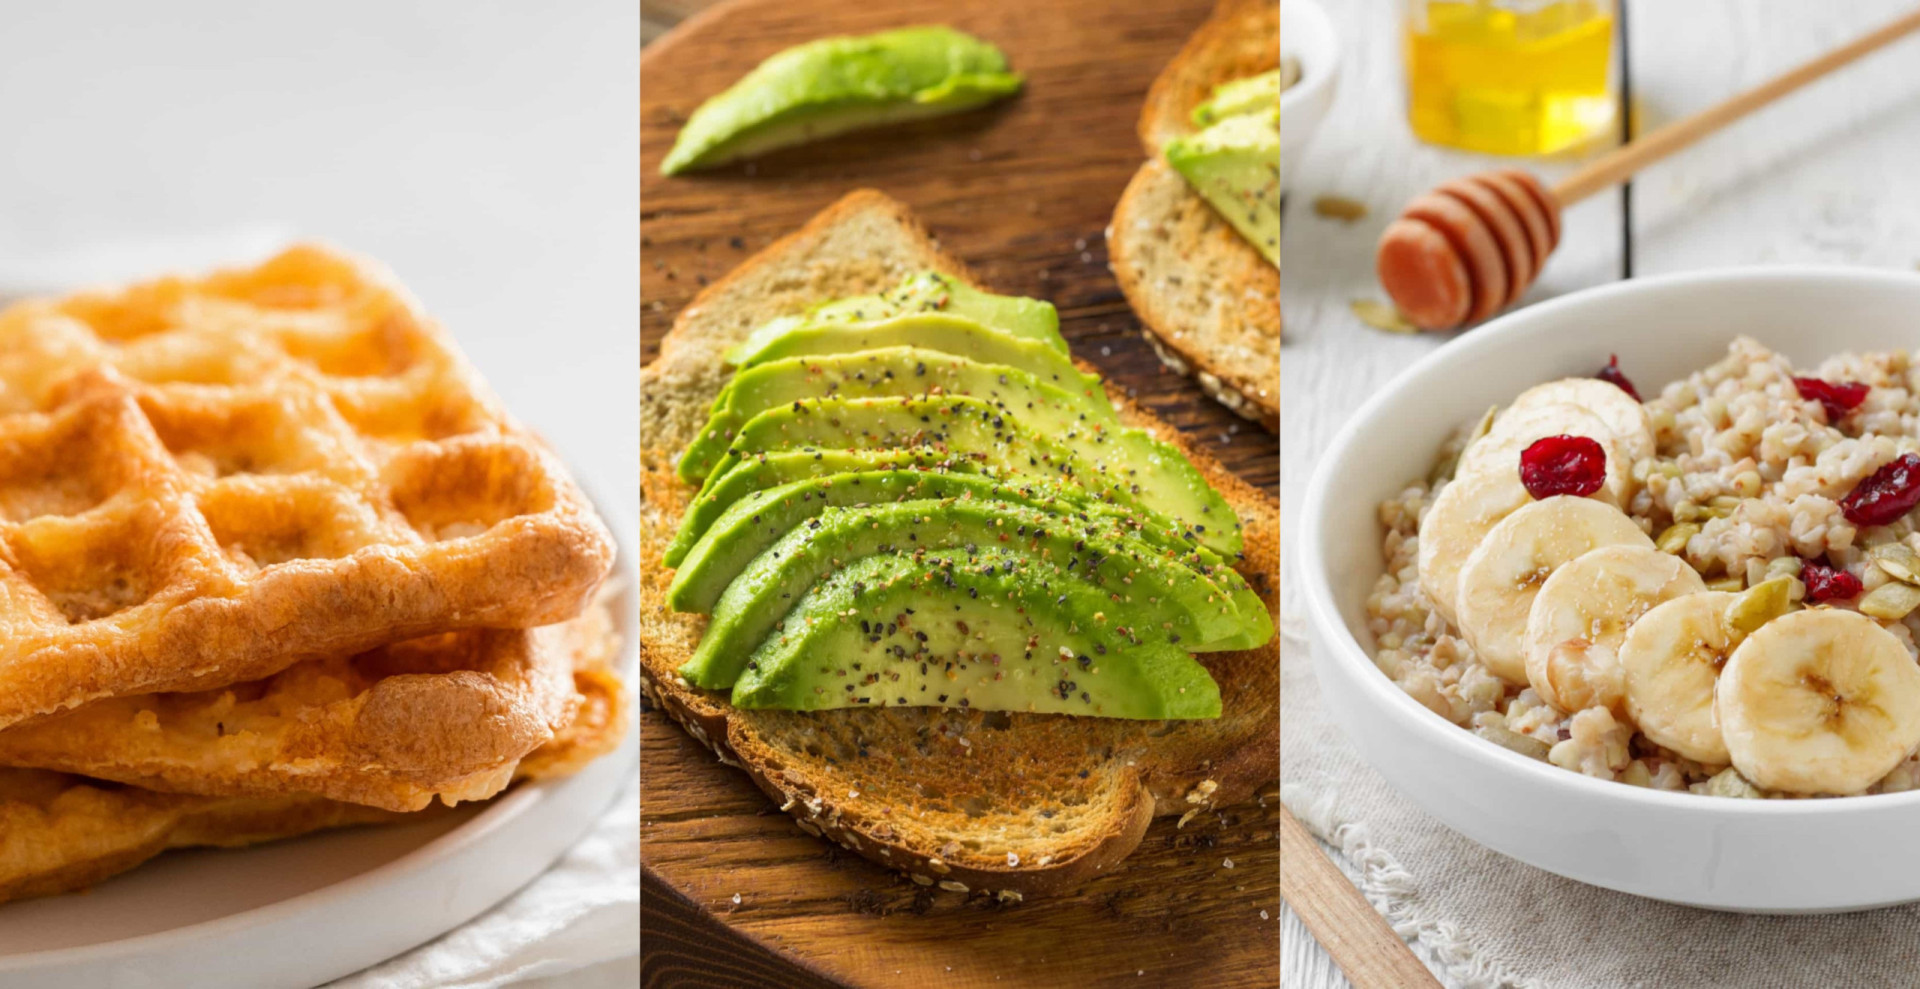 Quick and healthy breakfast ideas for a busy morning